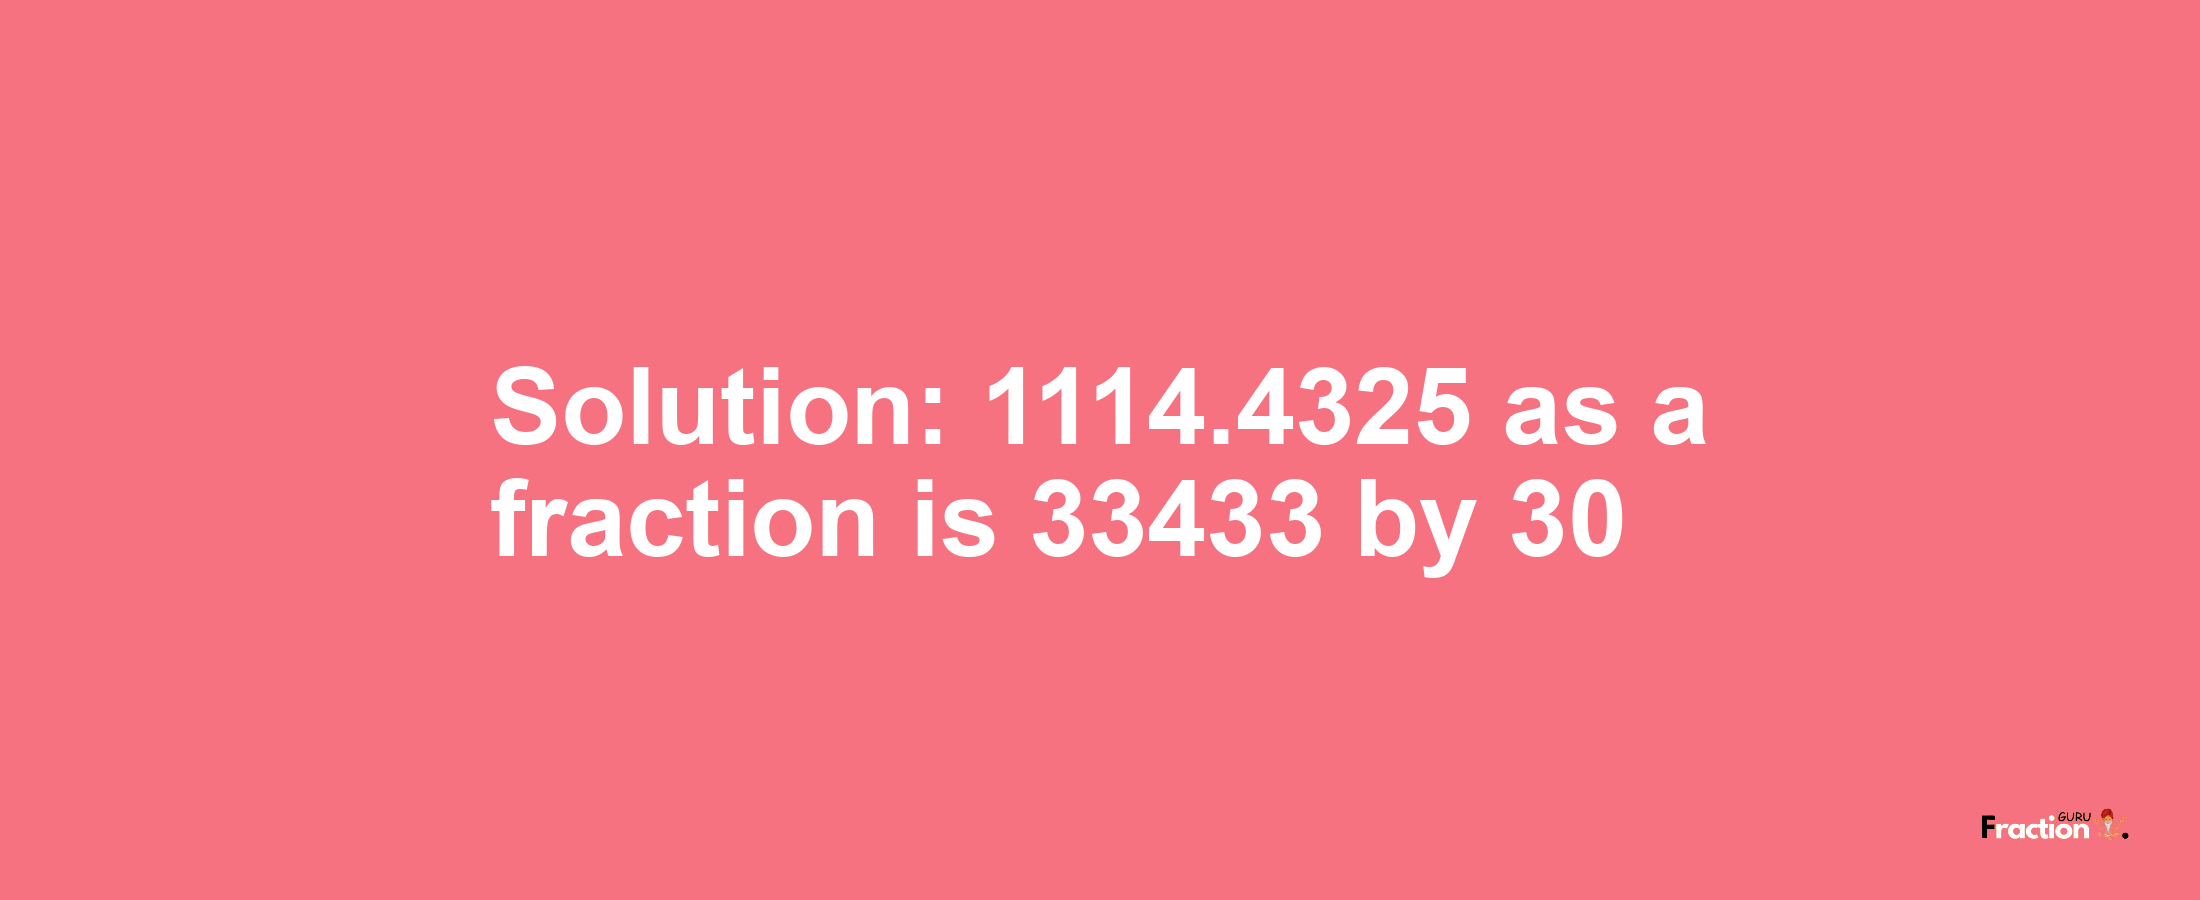 Solution:1114.4325 as a fraction is 33433/30